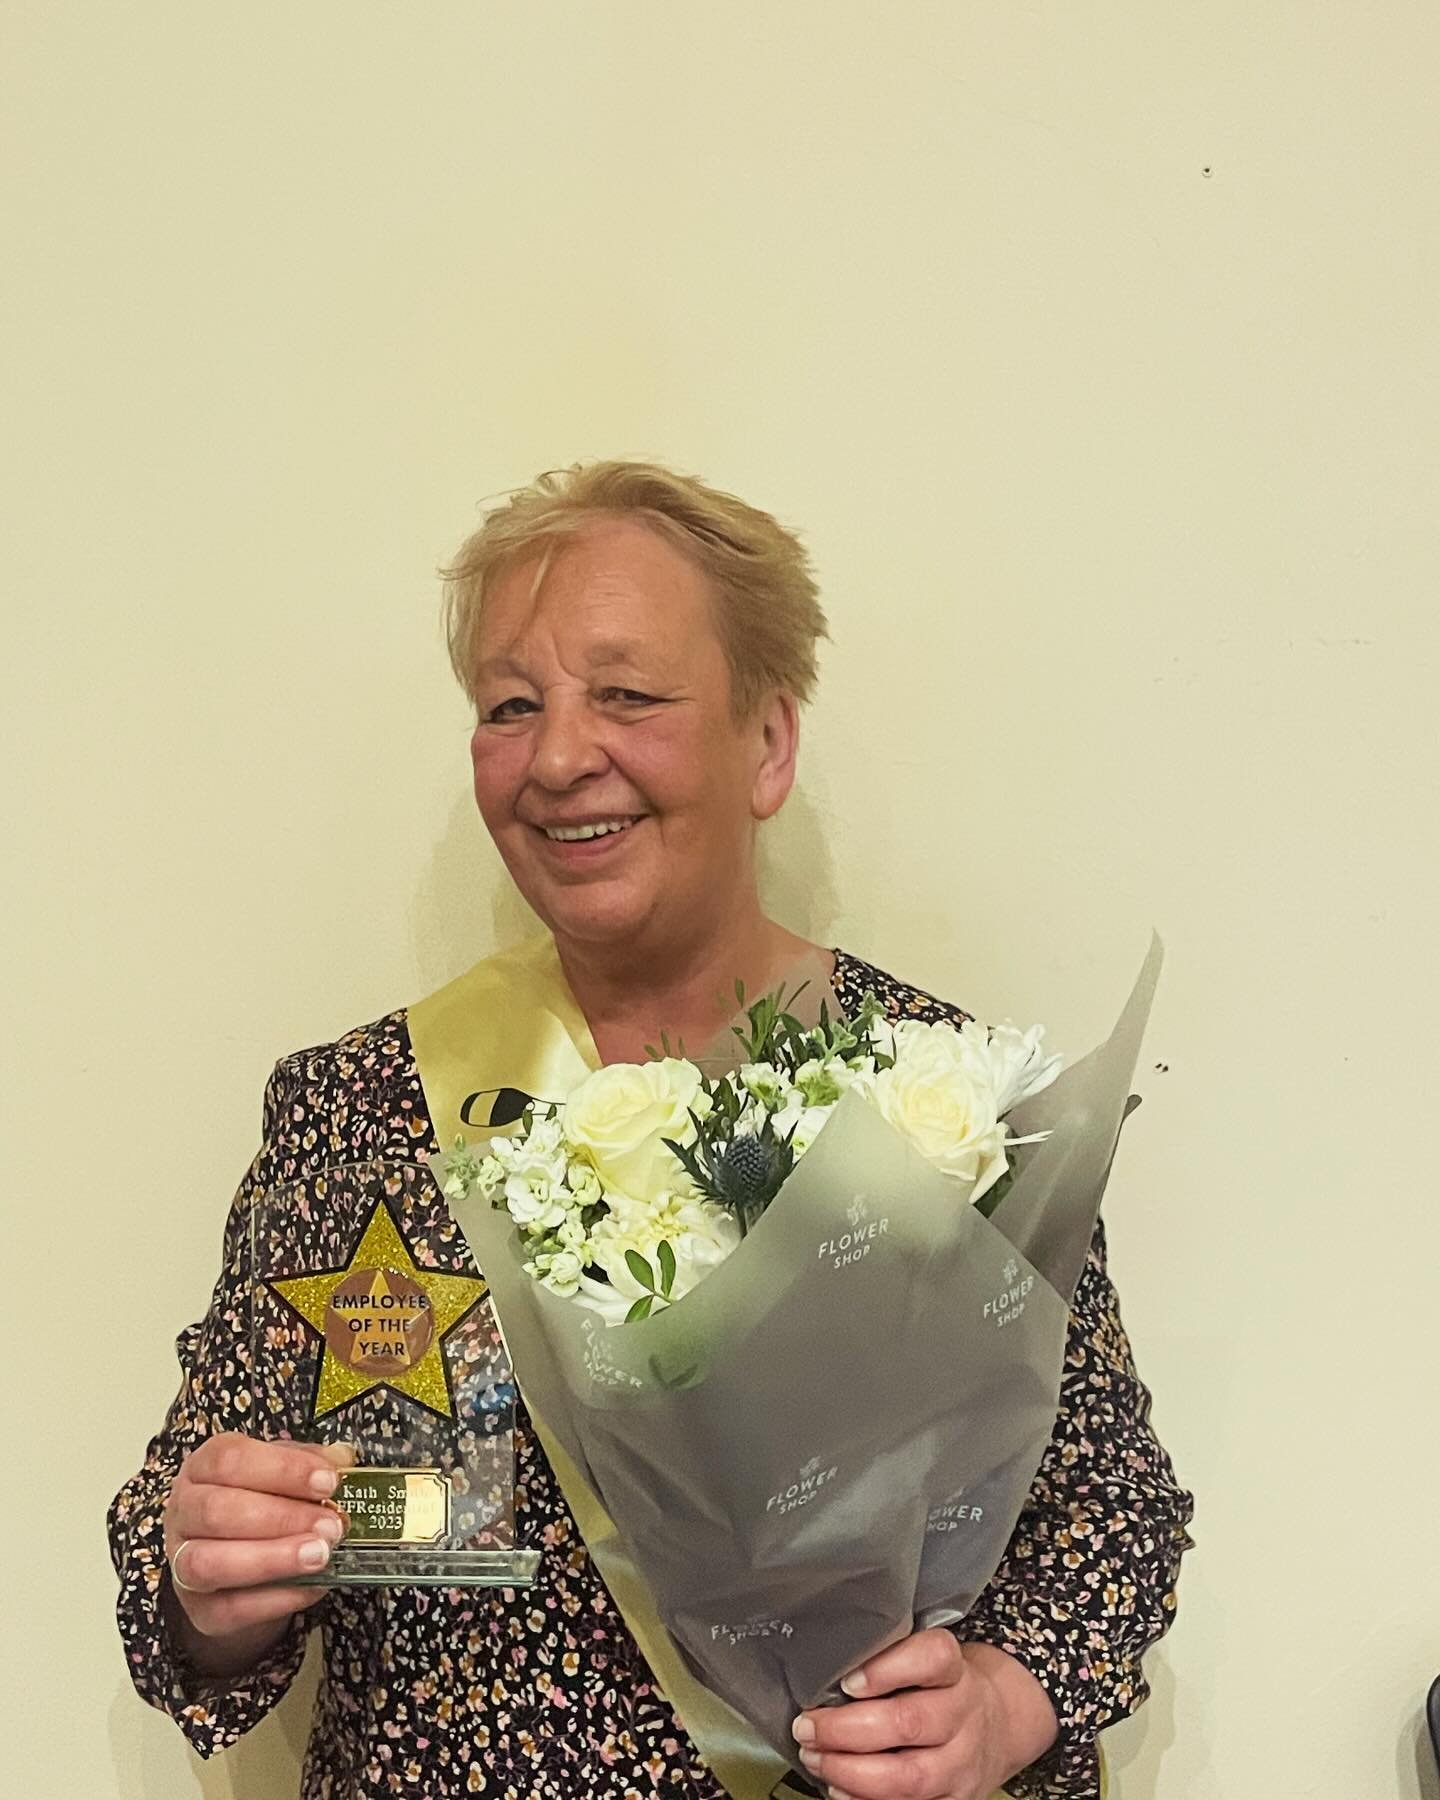 Another one of our wonderful winners is Kath Smith 🏆 who is Fairfield Residential Employee of the Year 2023

Kath was nominated by all her fellow team members and below are just some of the lovely compliments we were sent

&ldquo;Always first to off